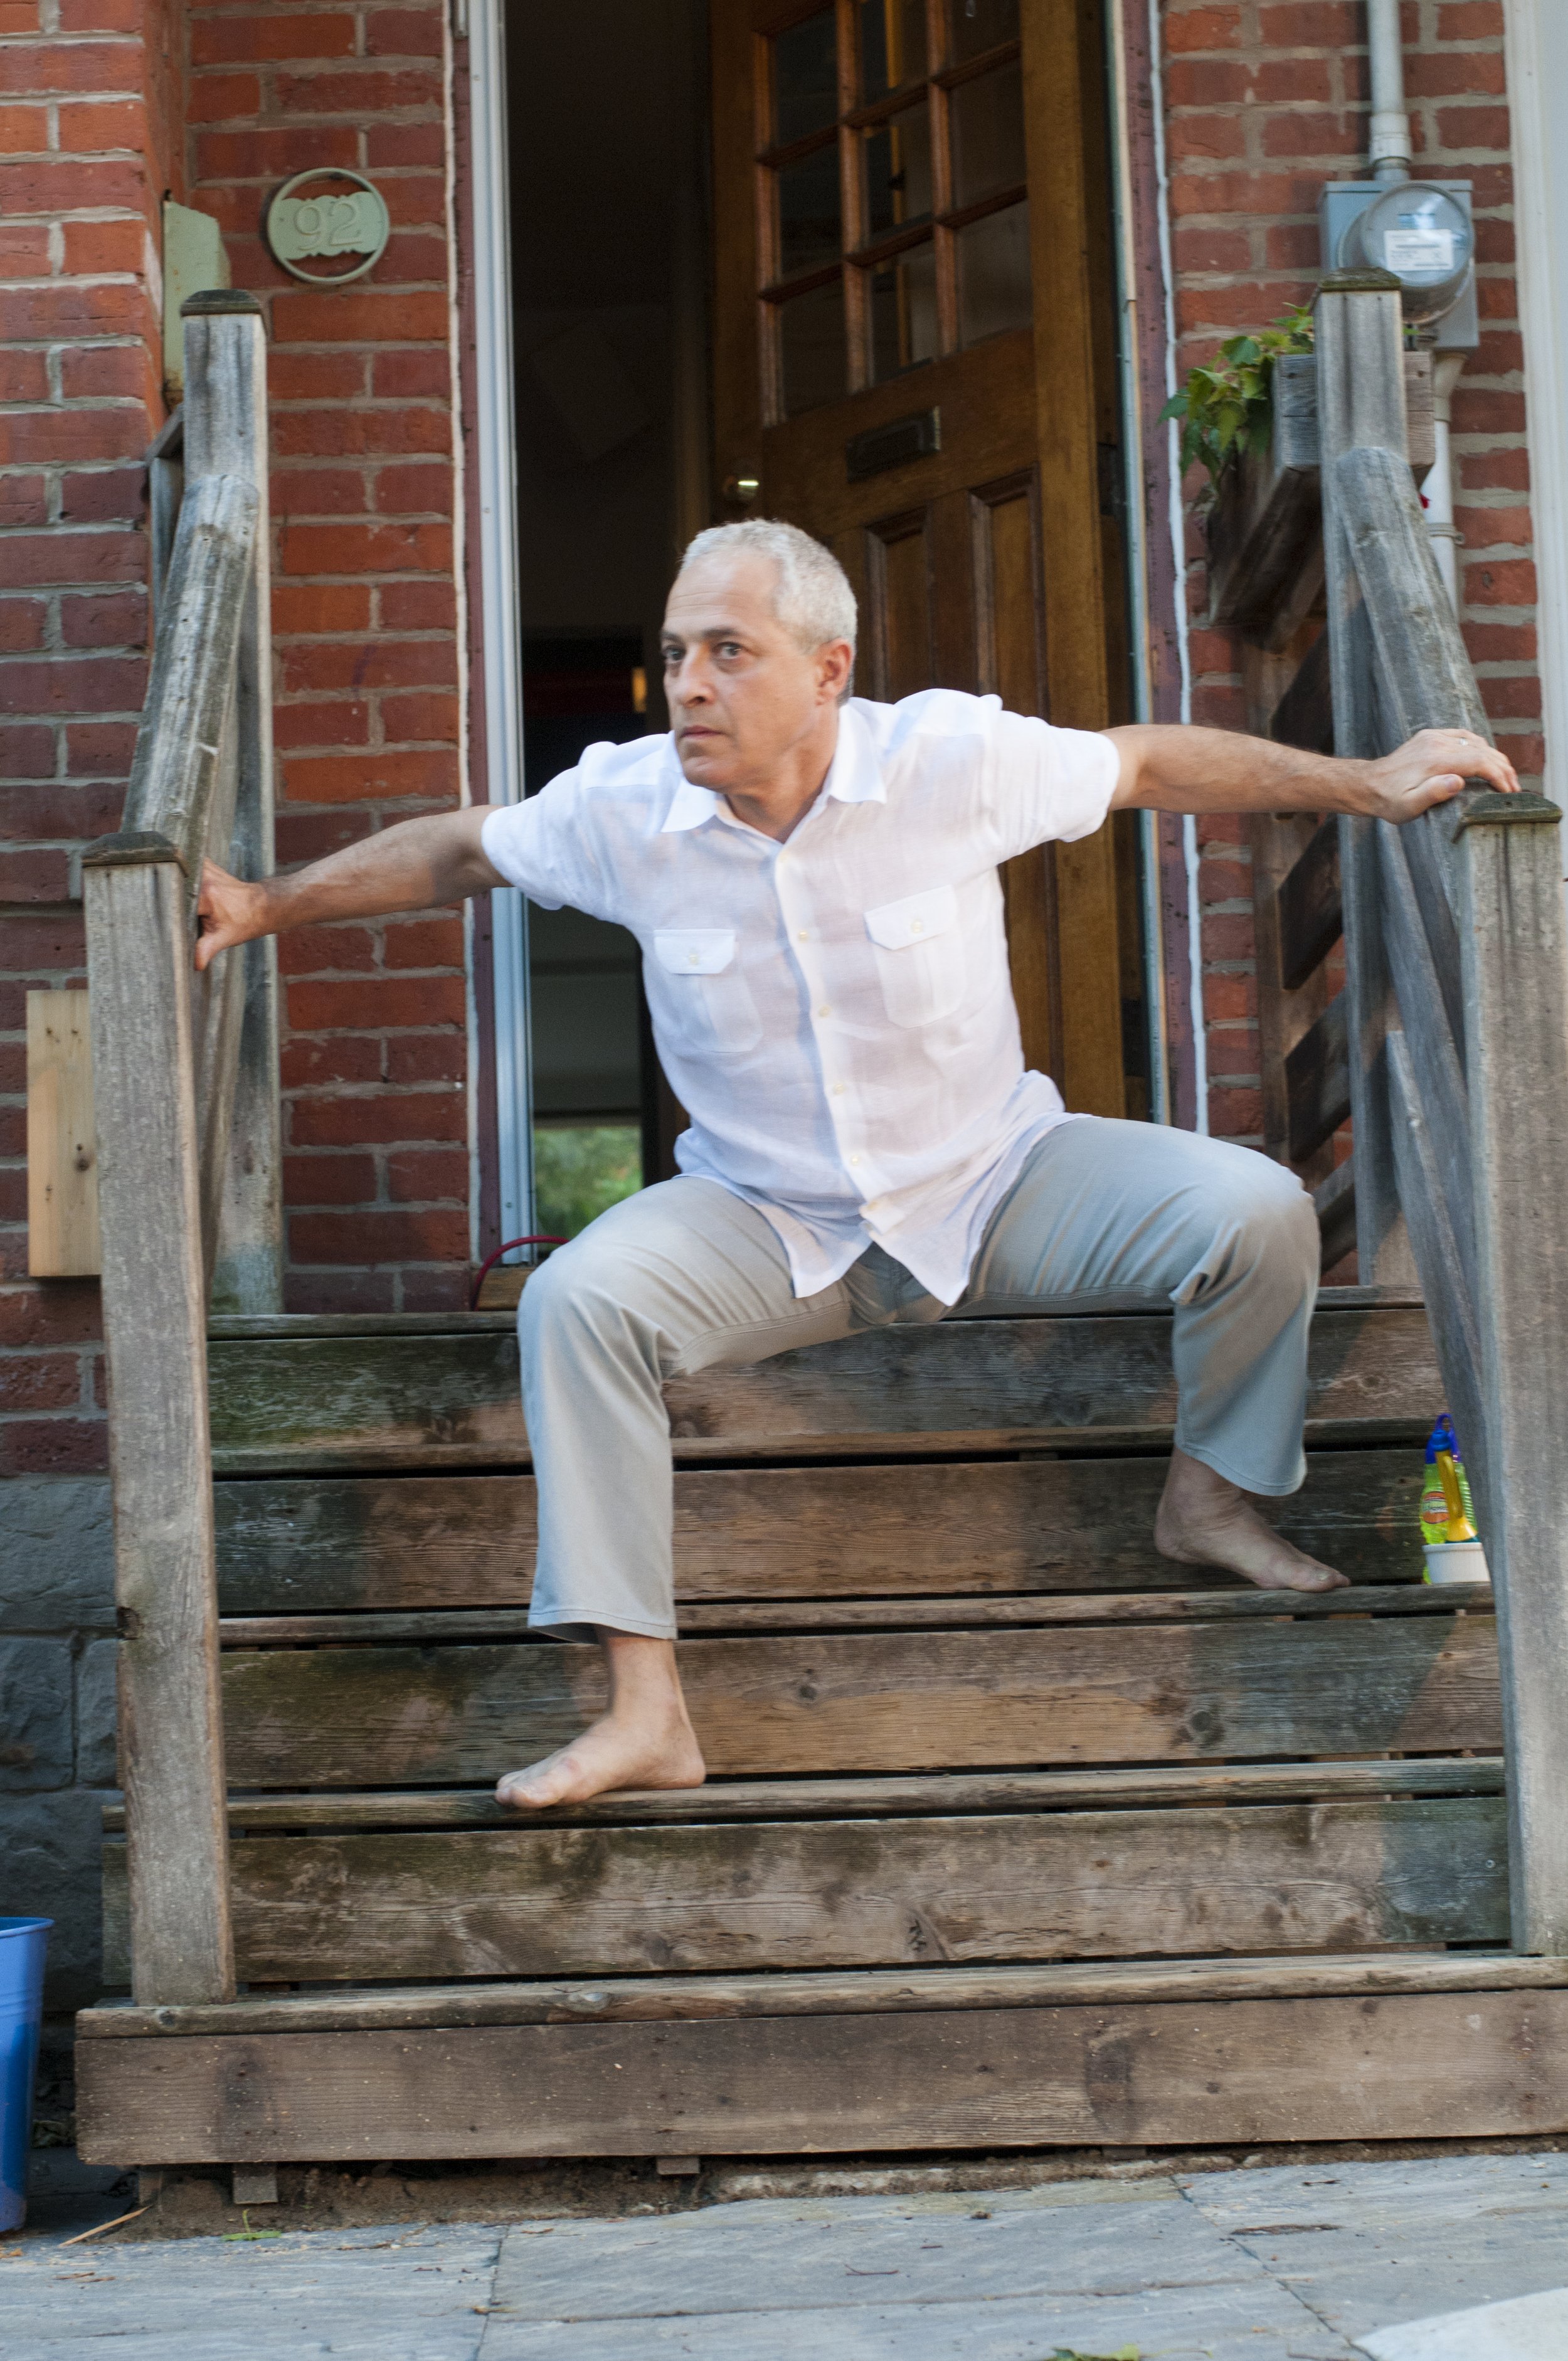 Man descending a wooden porch while in a squat